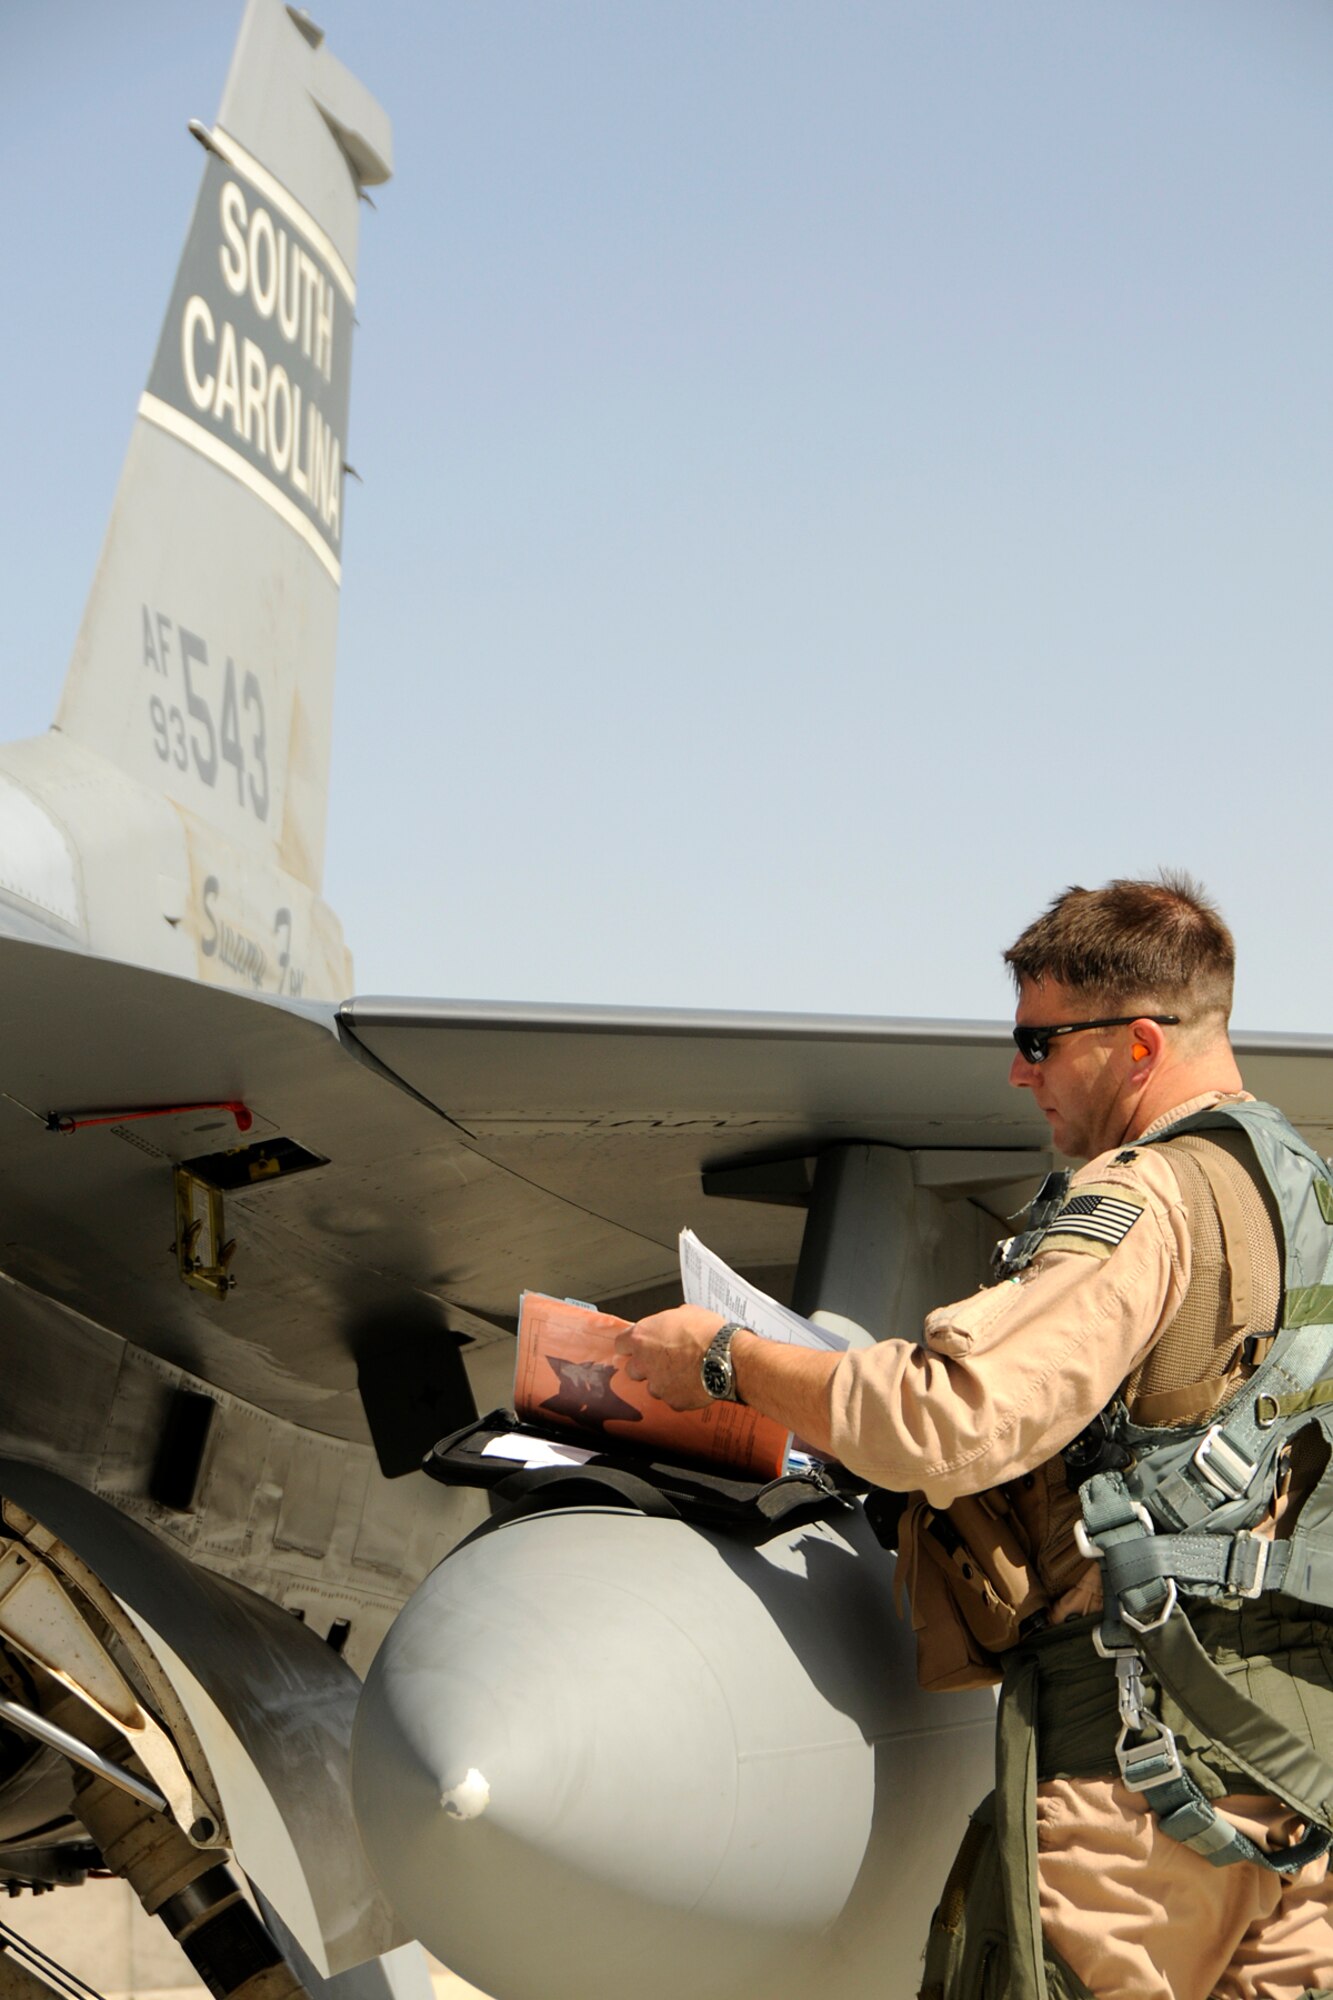 Lt. Col. Michael Rose, a fighter pilot assigned to the 157th Expeditionary Fighter Squadron at Kandahar Airfield, Afghanistan, returns to the flight line in an F-16 Fighting Falcon after flying a mission May 31, 2012. Personnel are deployed from McEntire Joint National Guard Base, S.C., in support of Operation Enduring Freedom. Swamp Fox F-16's, pilots, and support personnel began their Air Expeditionary Force deployment early April to take over flying missions for the air tasking order and provide close air support for troops on the ground in Afghanistan.